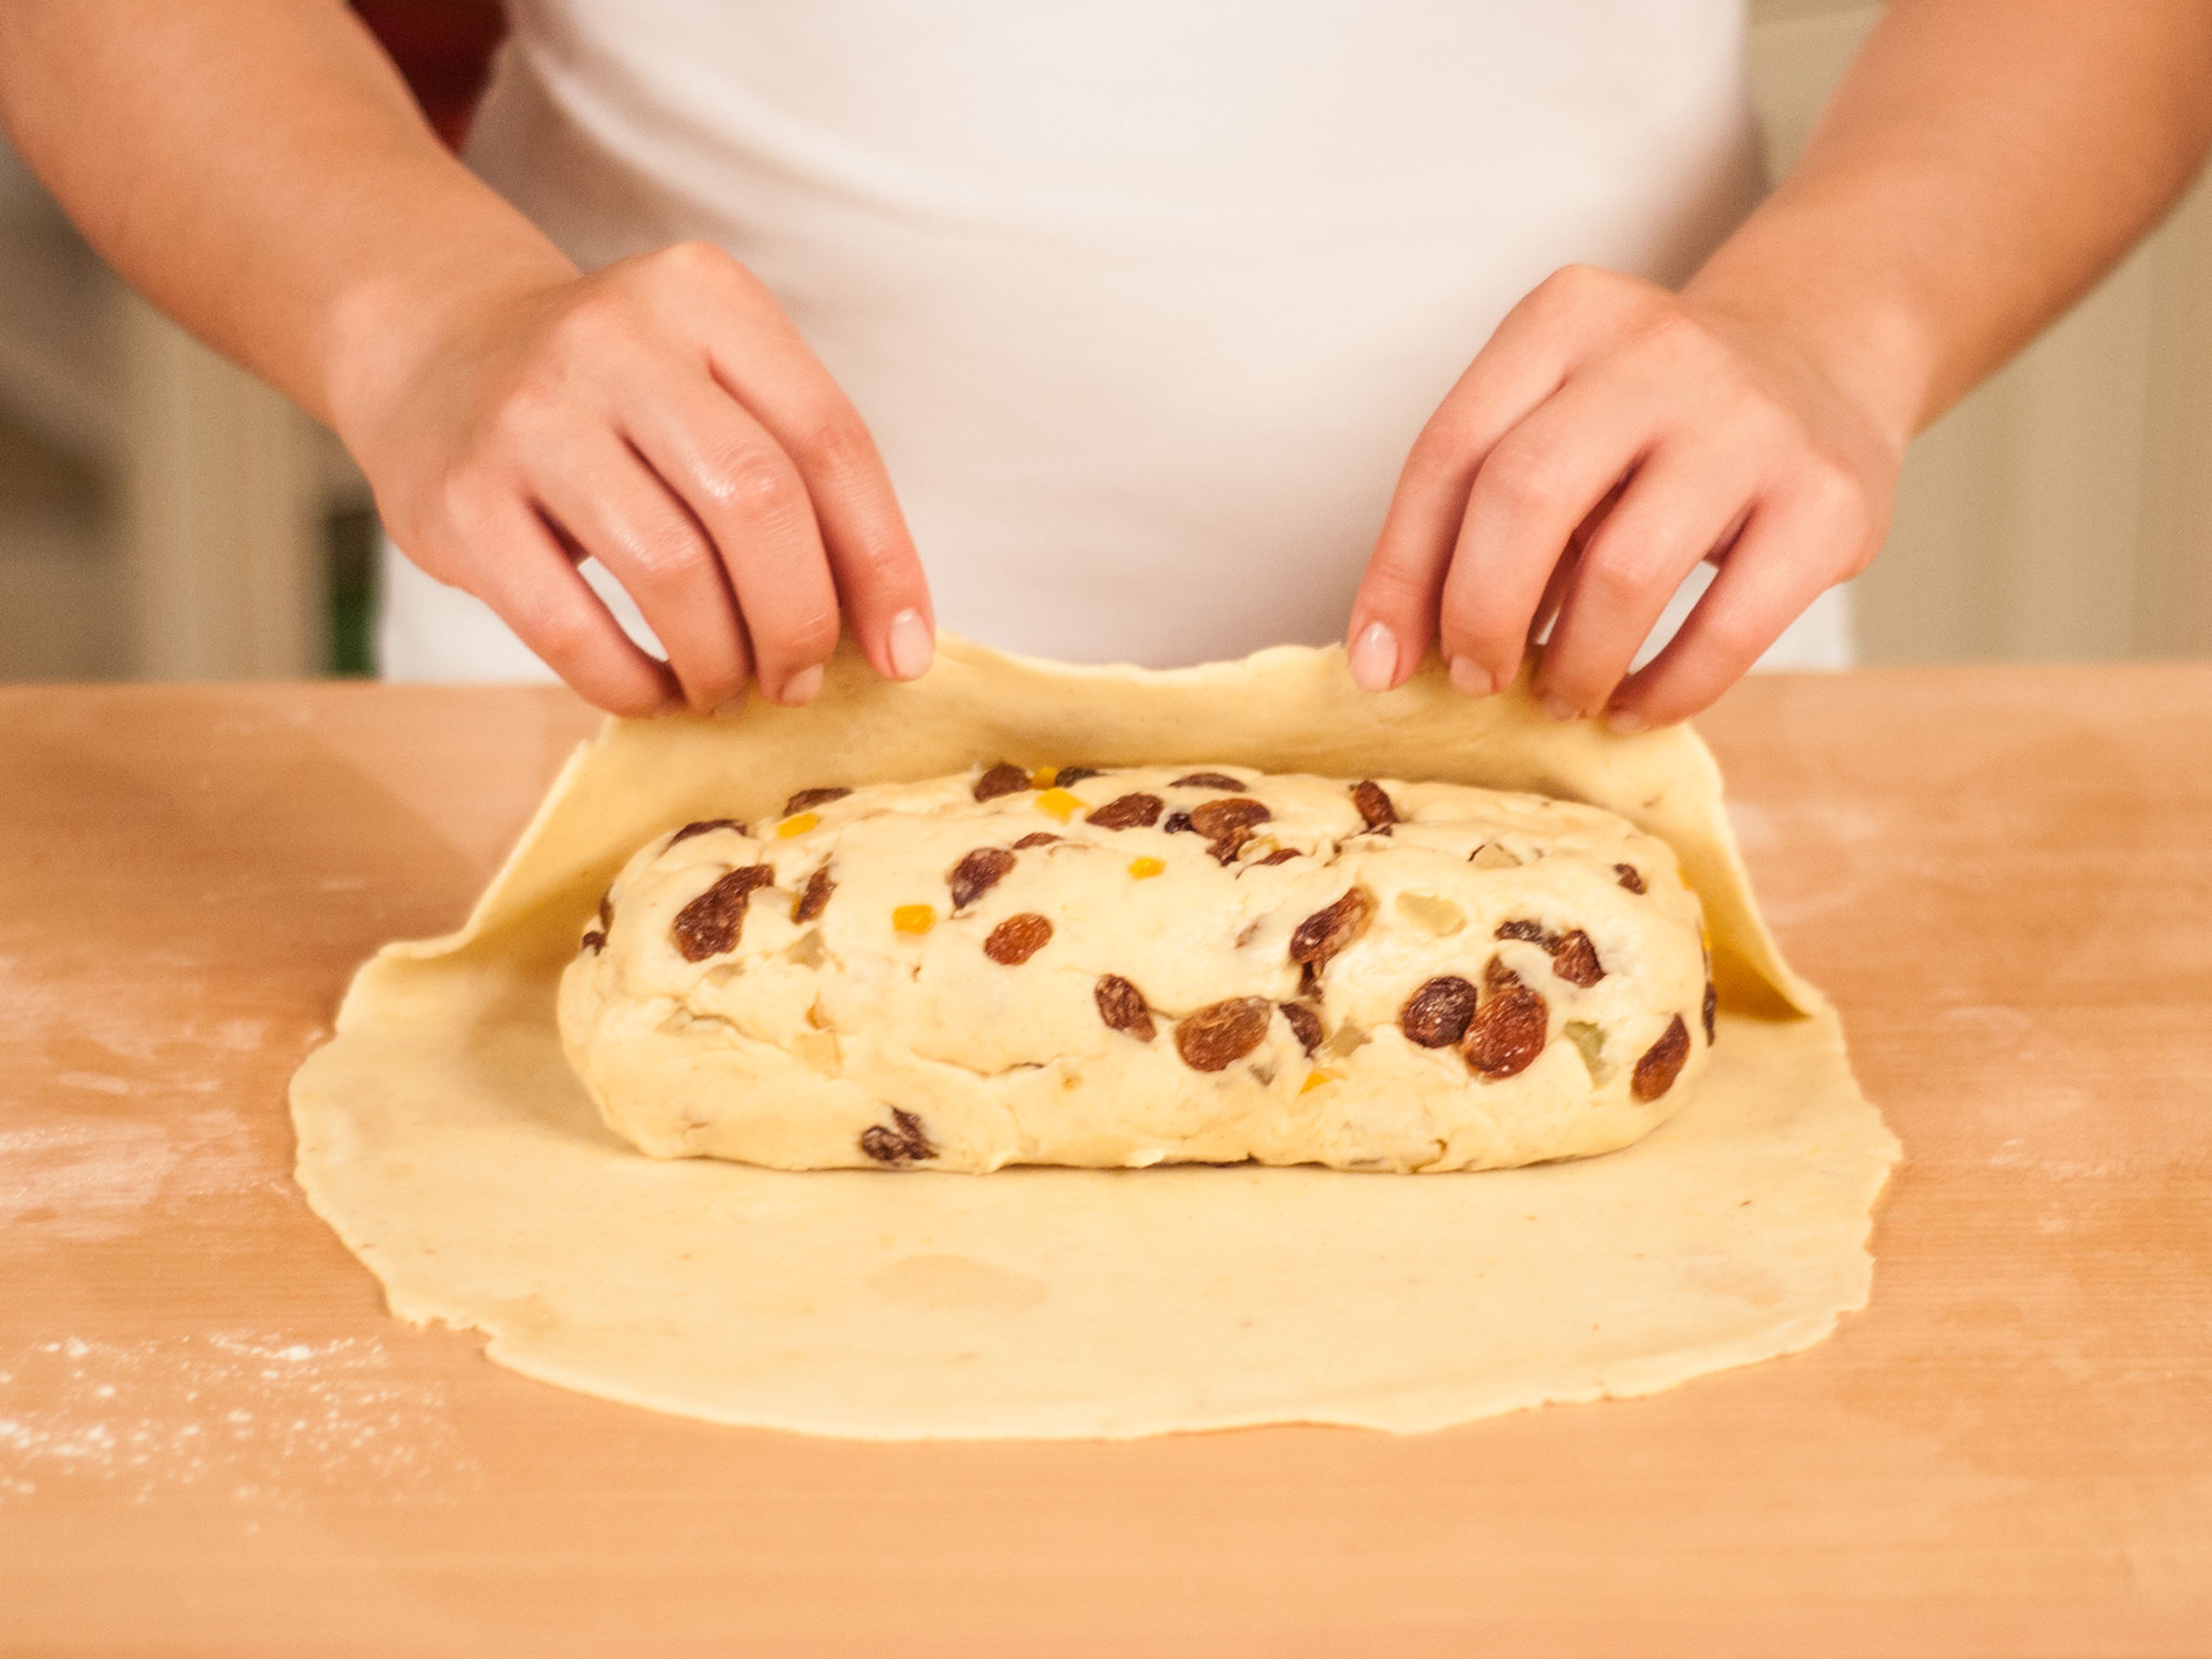 Place fruit dough onto the lower third of the oval and roll up. Tuck in overlapping sides. Transfer to a lined baking tray seam side down. Bake in a preheated oven at 180°C/355°F for approx. 40 min. until golden. Leave to cool for approx. 10 min. Before serving, brush with melted butter and sprinkle with confectioners’ sugar.